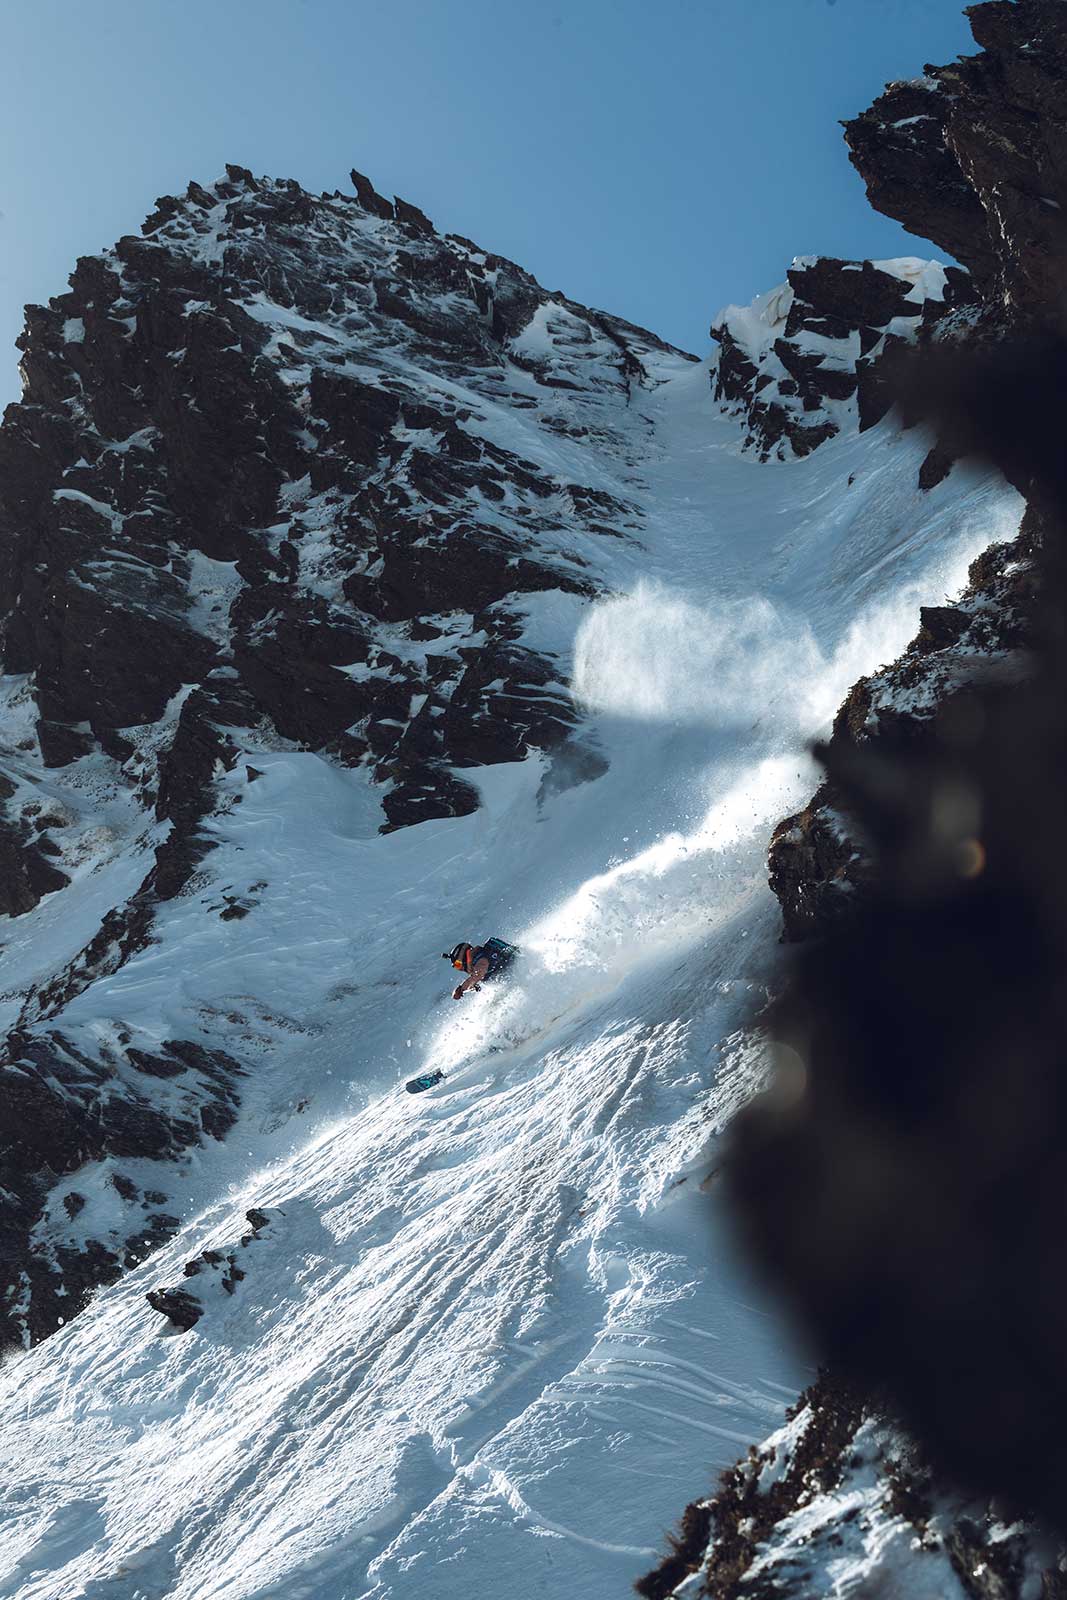 Juliette Willmann finds soft snow during the second Freeride World Tour stop of 2021 in Ordino Arcalis, Andorra.